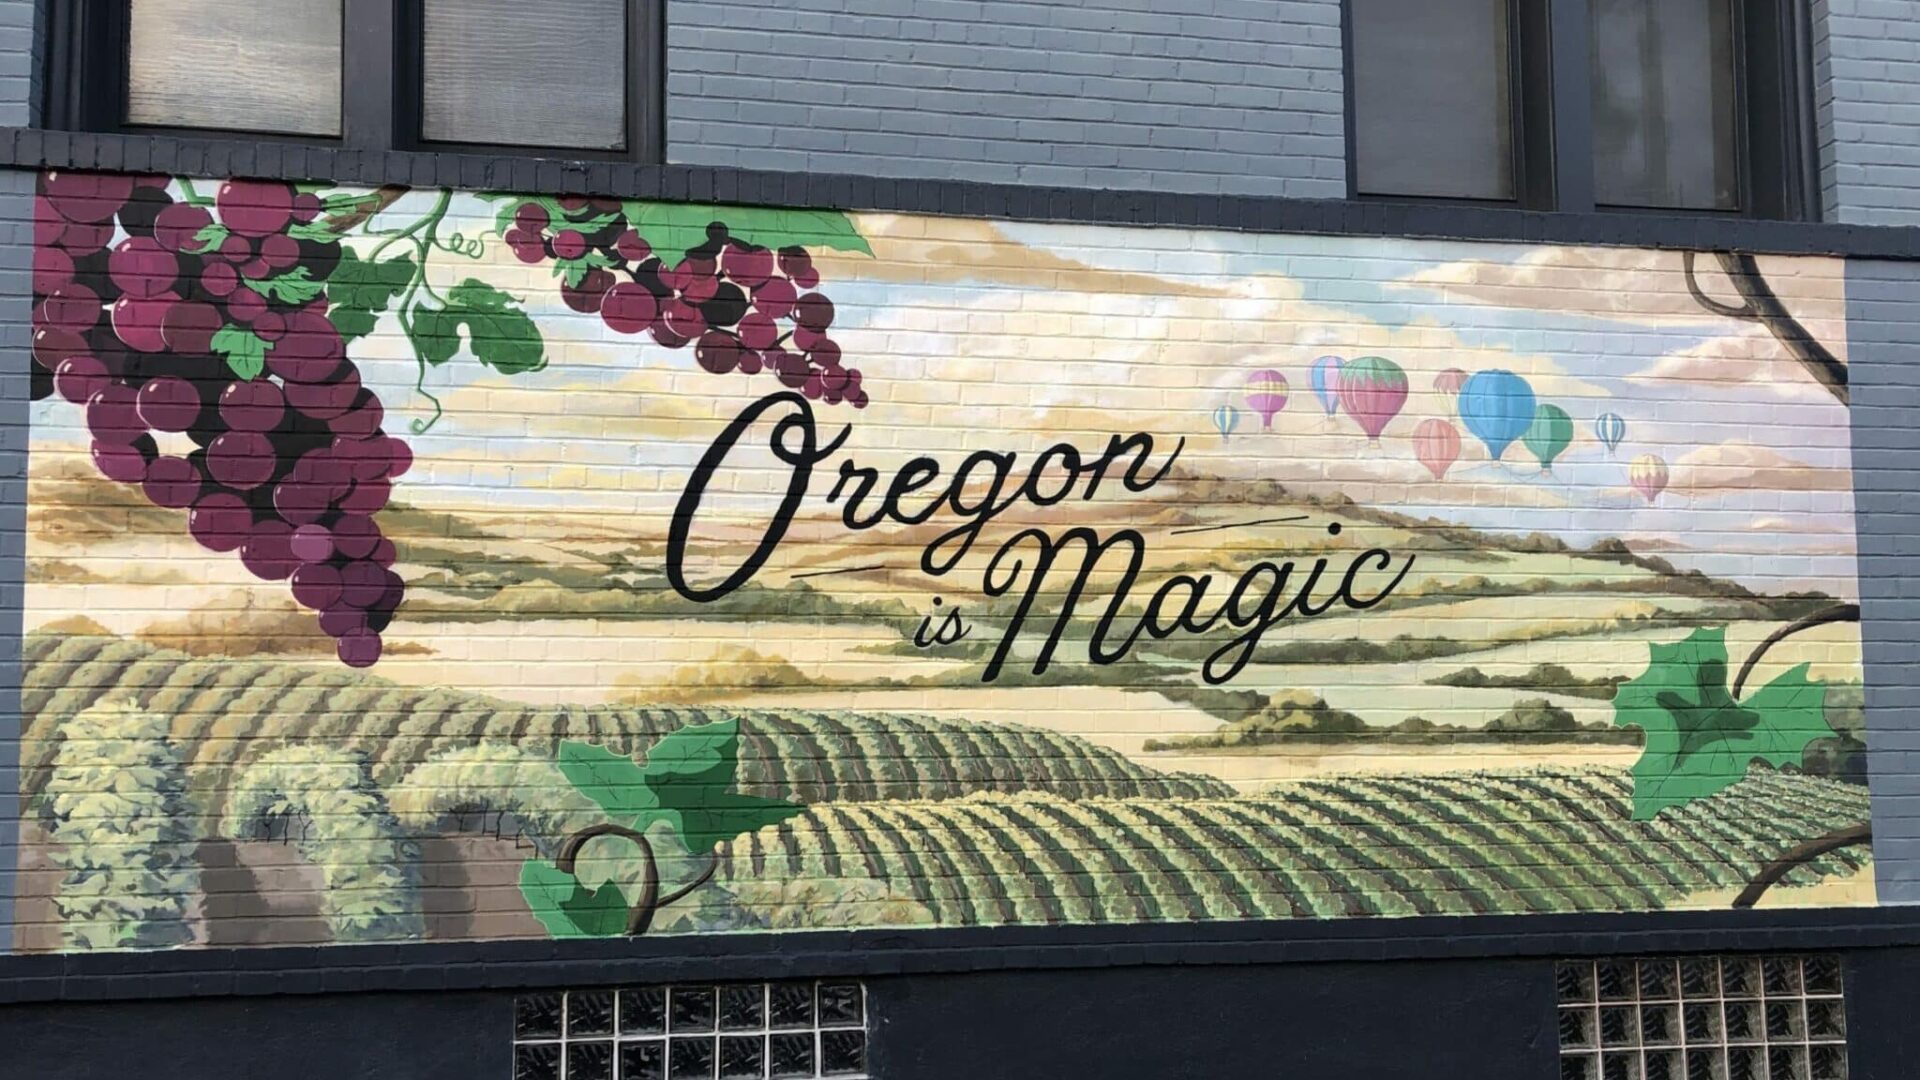 Oregon is Magic mural with Willamette Valley Vineyards and grapes